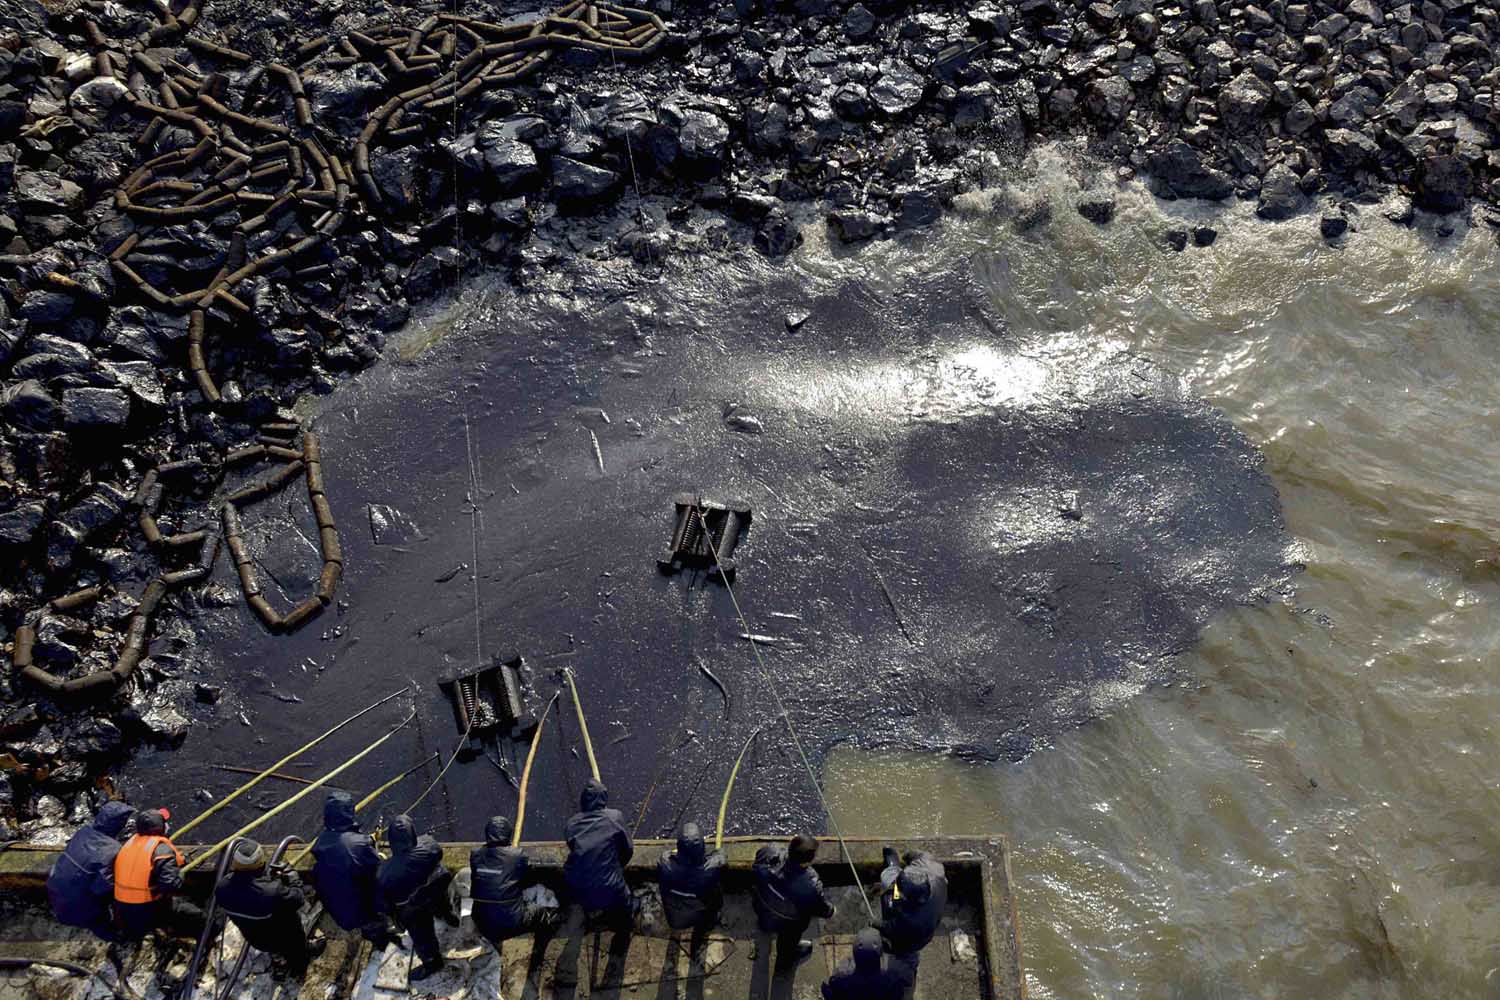 Nov. 25, 2013. Workers clean up leaked oil after an oil pipeline explosion last week in Qingdao, Shandong province, China.